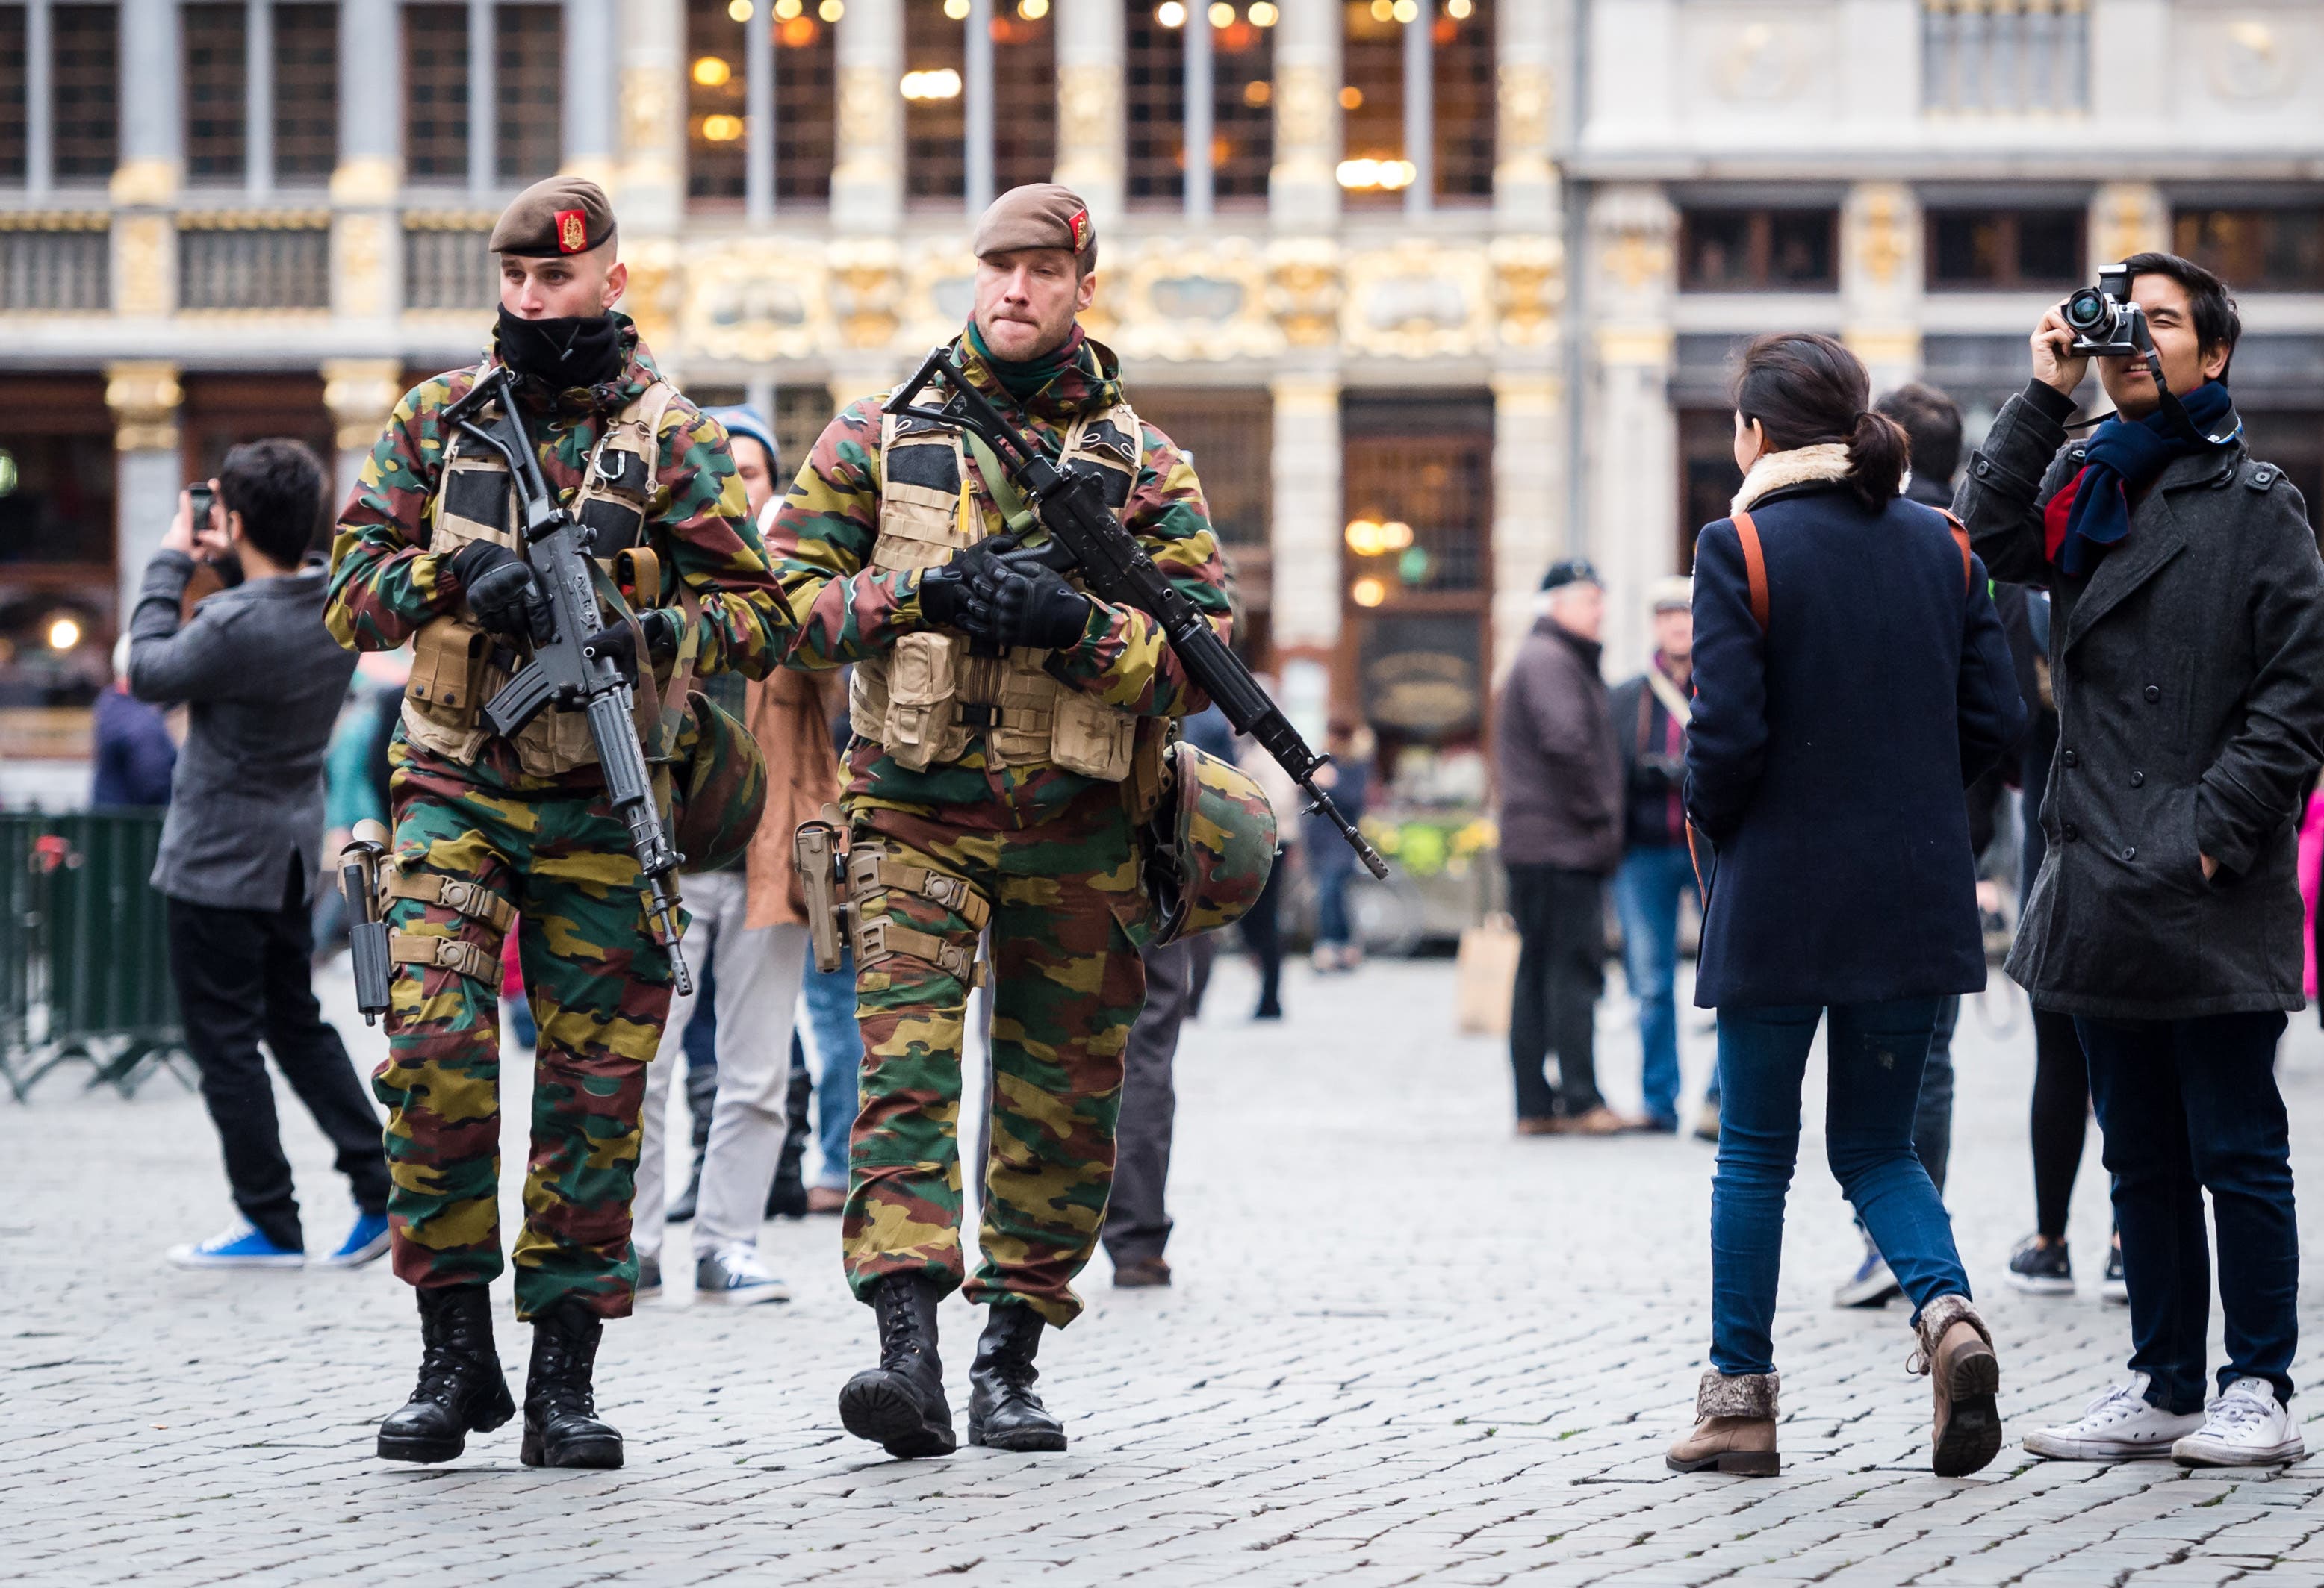 Belgian Army soldiers patrol in the picturesque Grand Place in the center of Brussels on Friday, Nov. 20, 2015. 